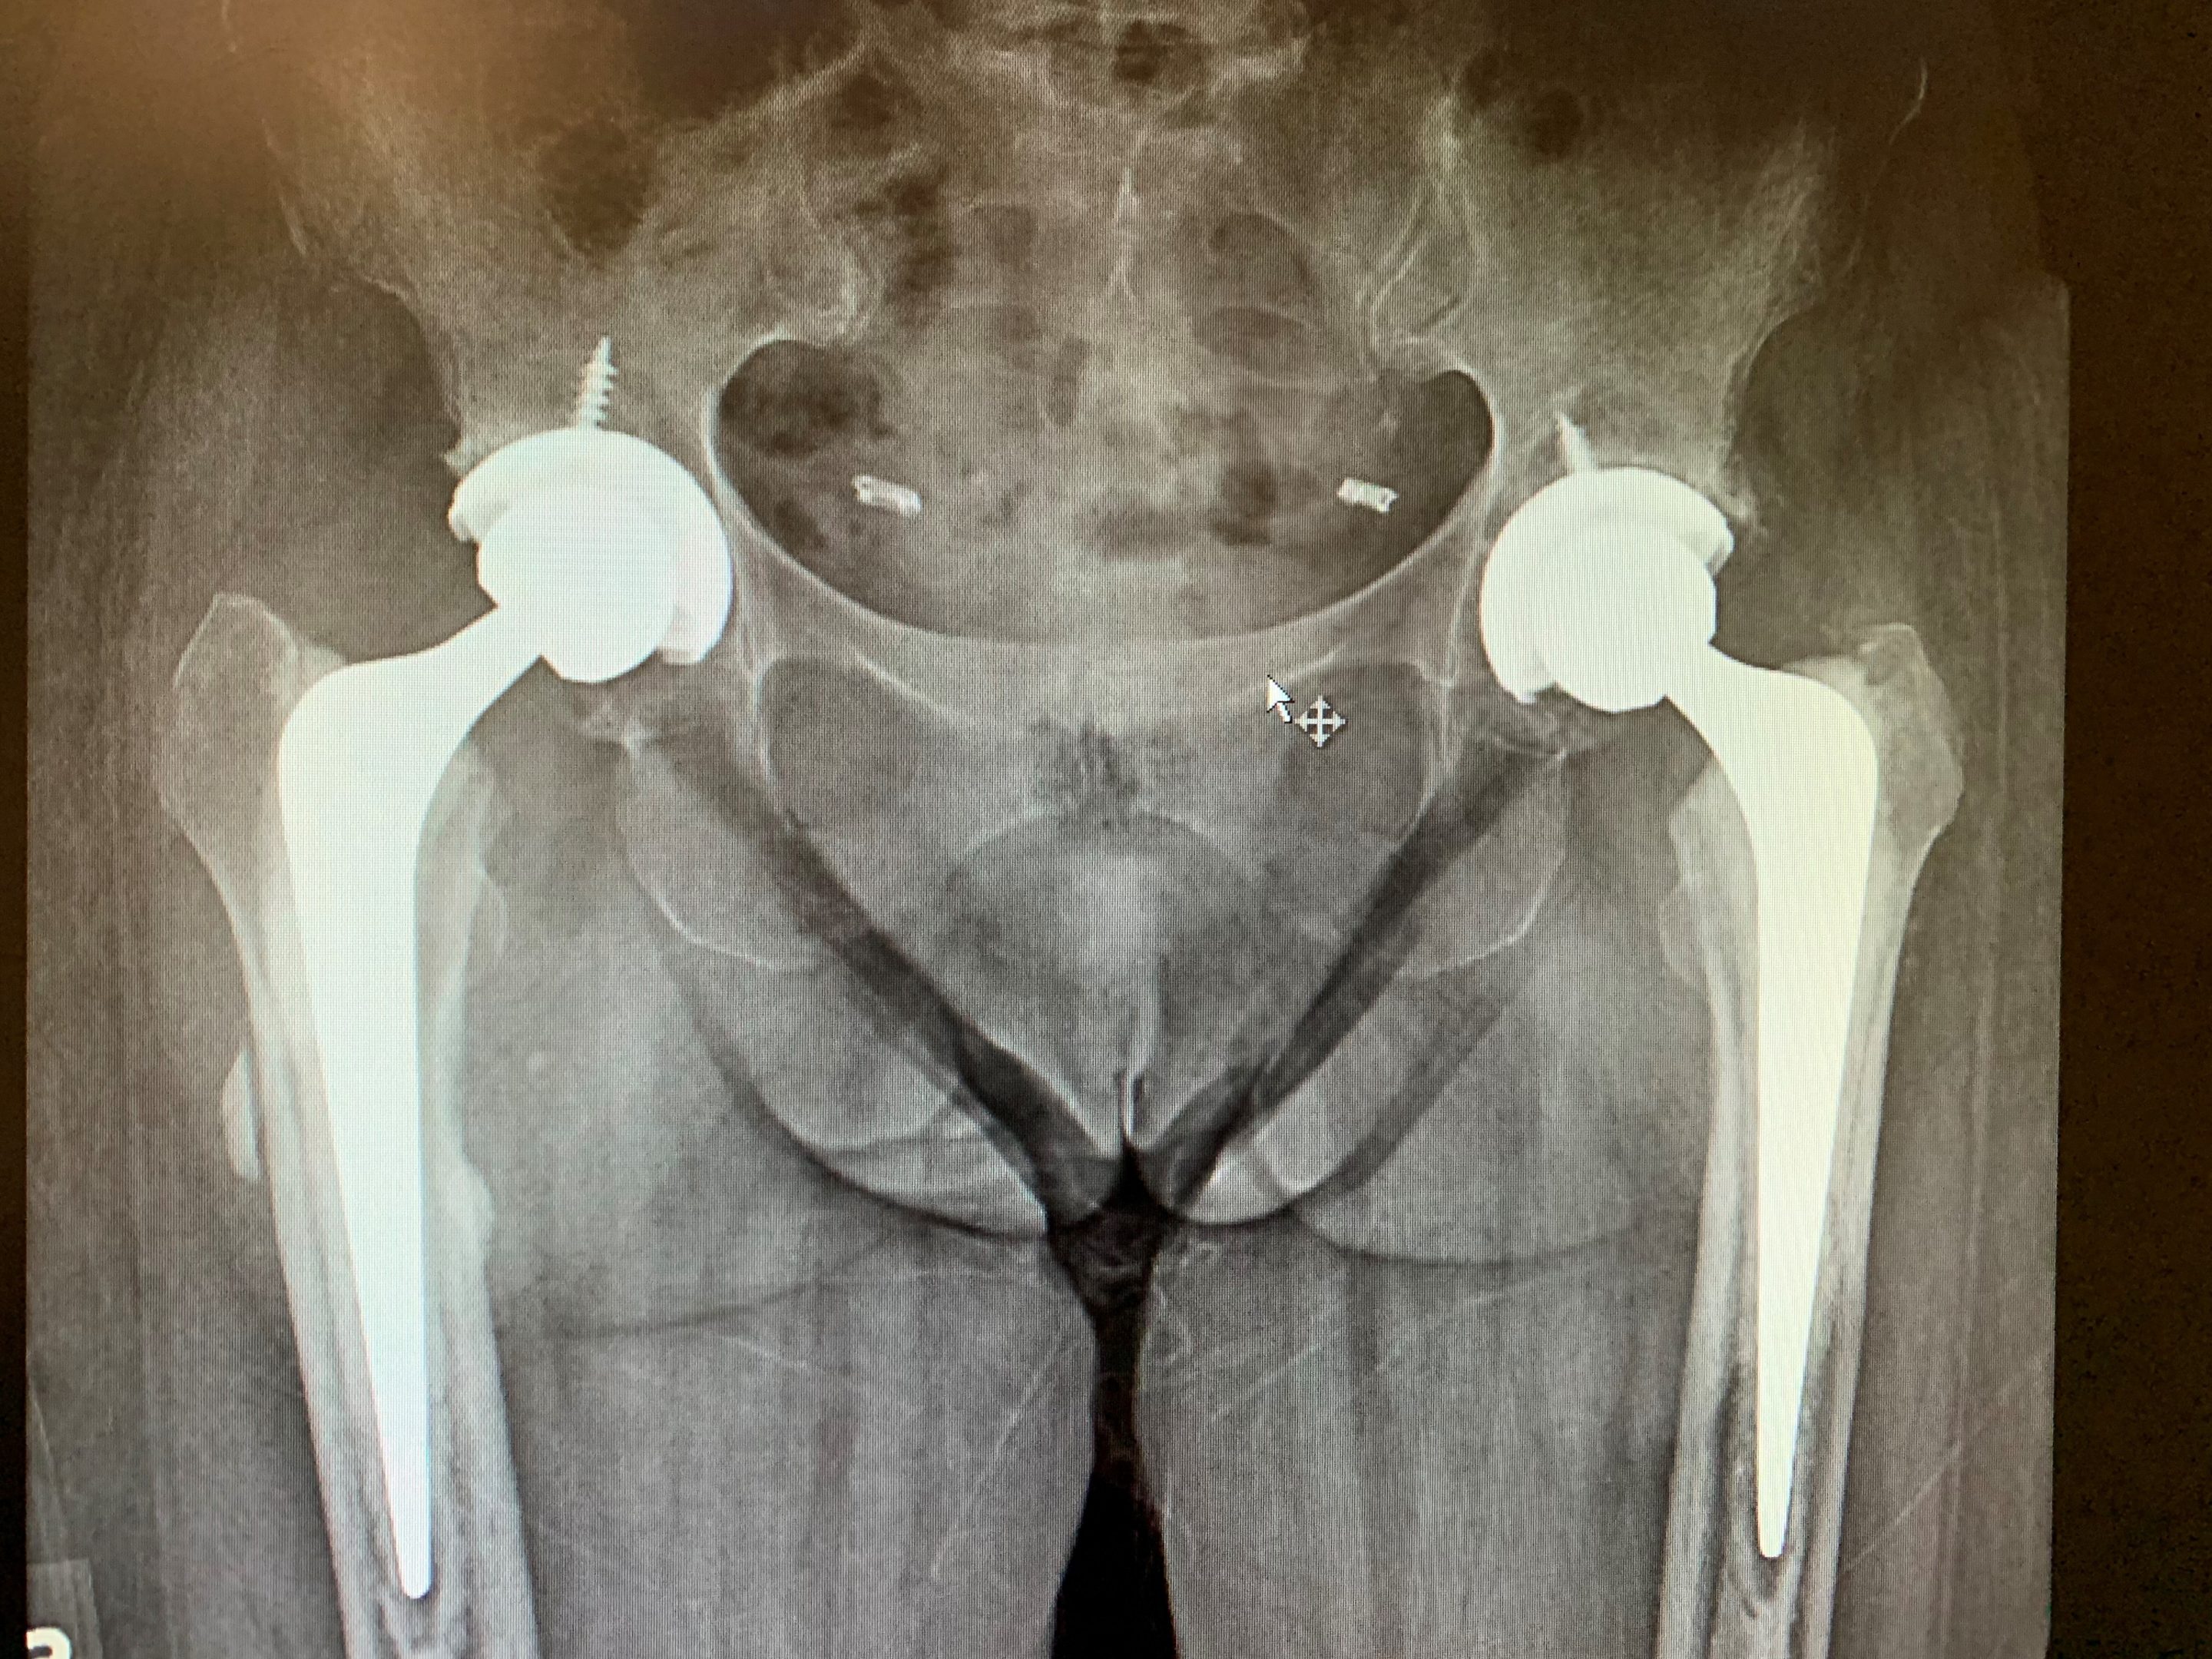 Bilateral hip replacement in 66 year old femaleb